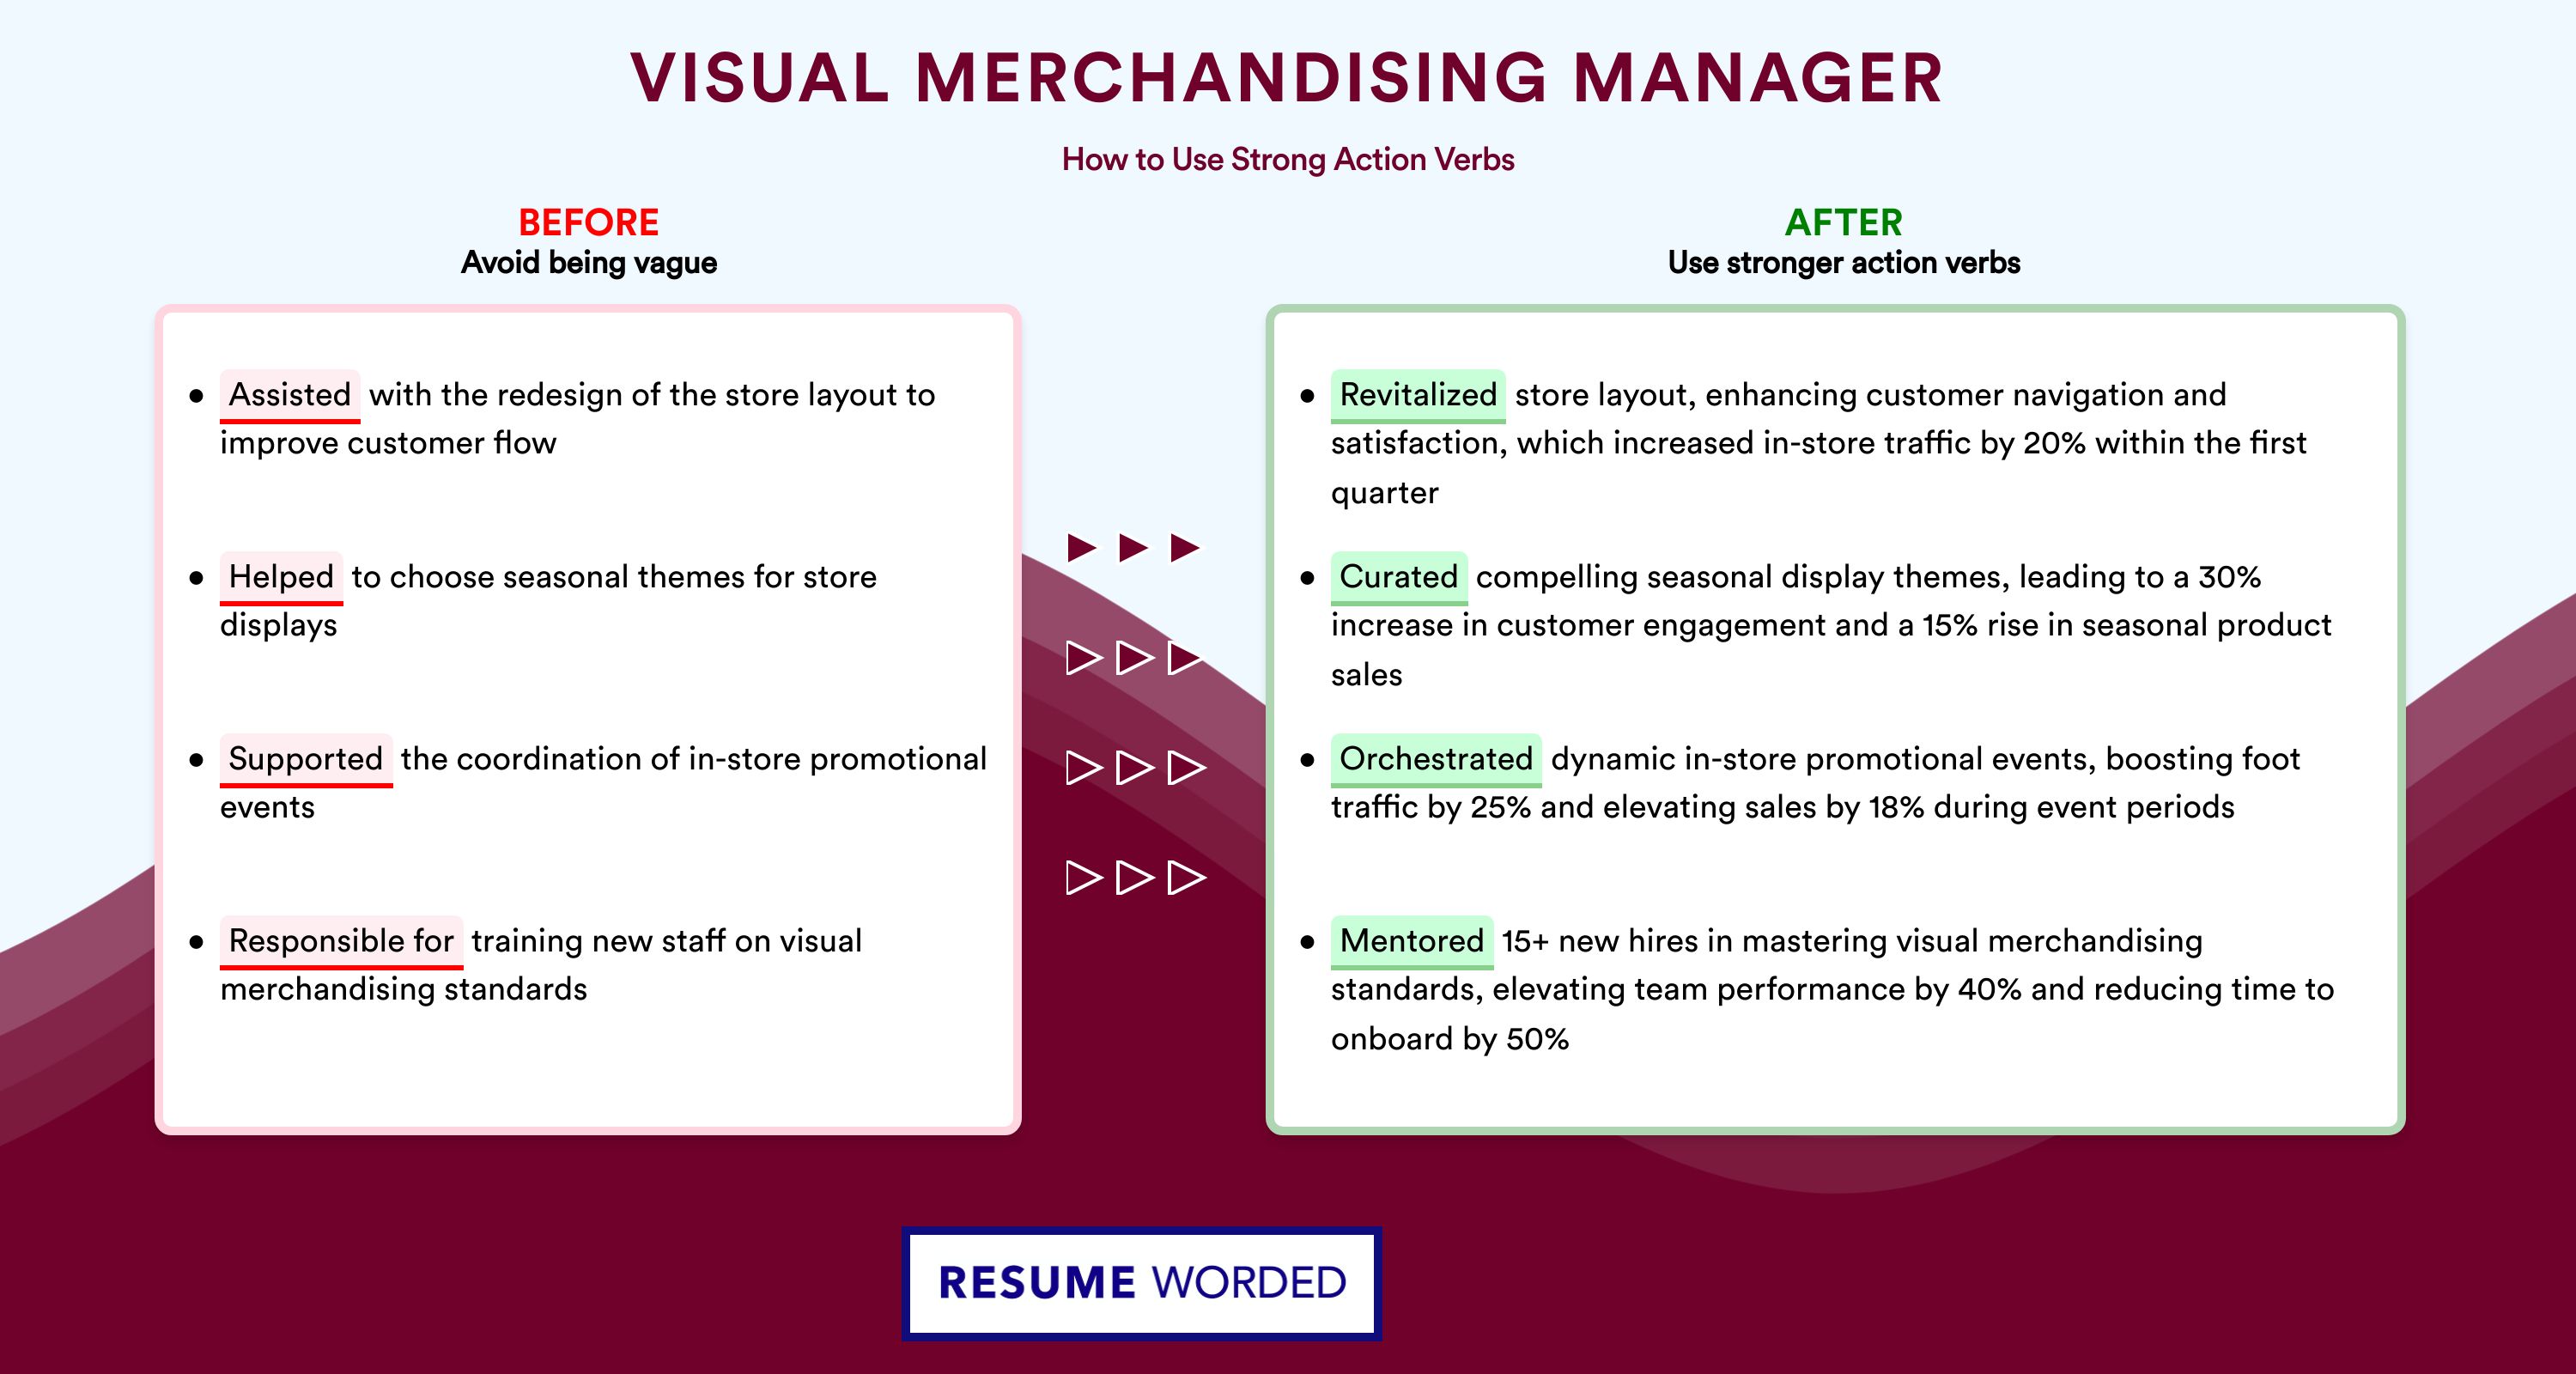 Action Verbs for Visual Merchandising Manager